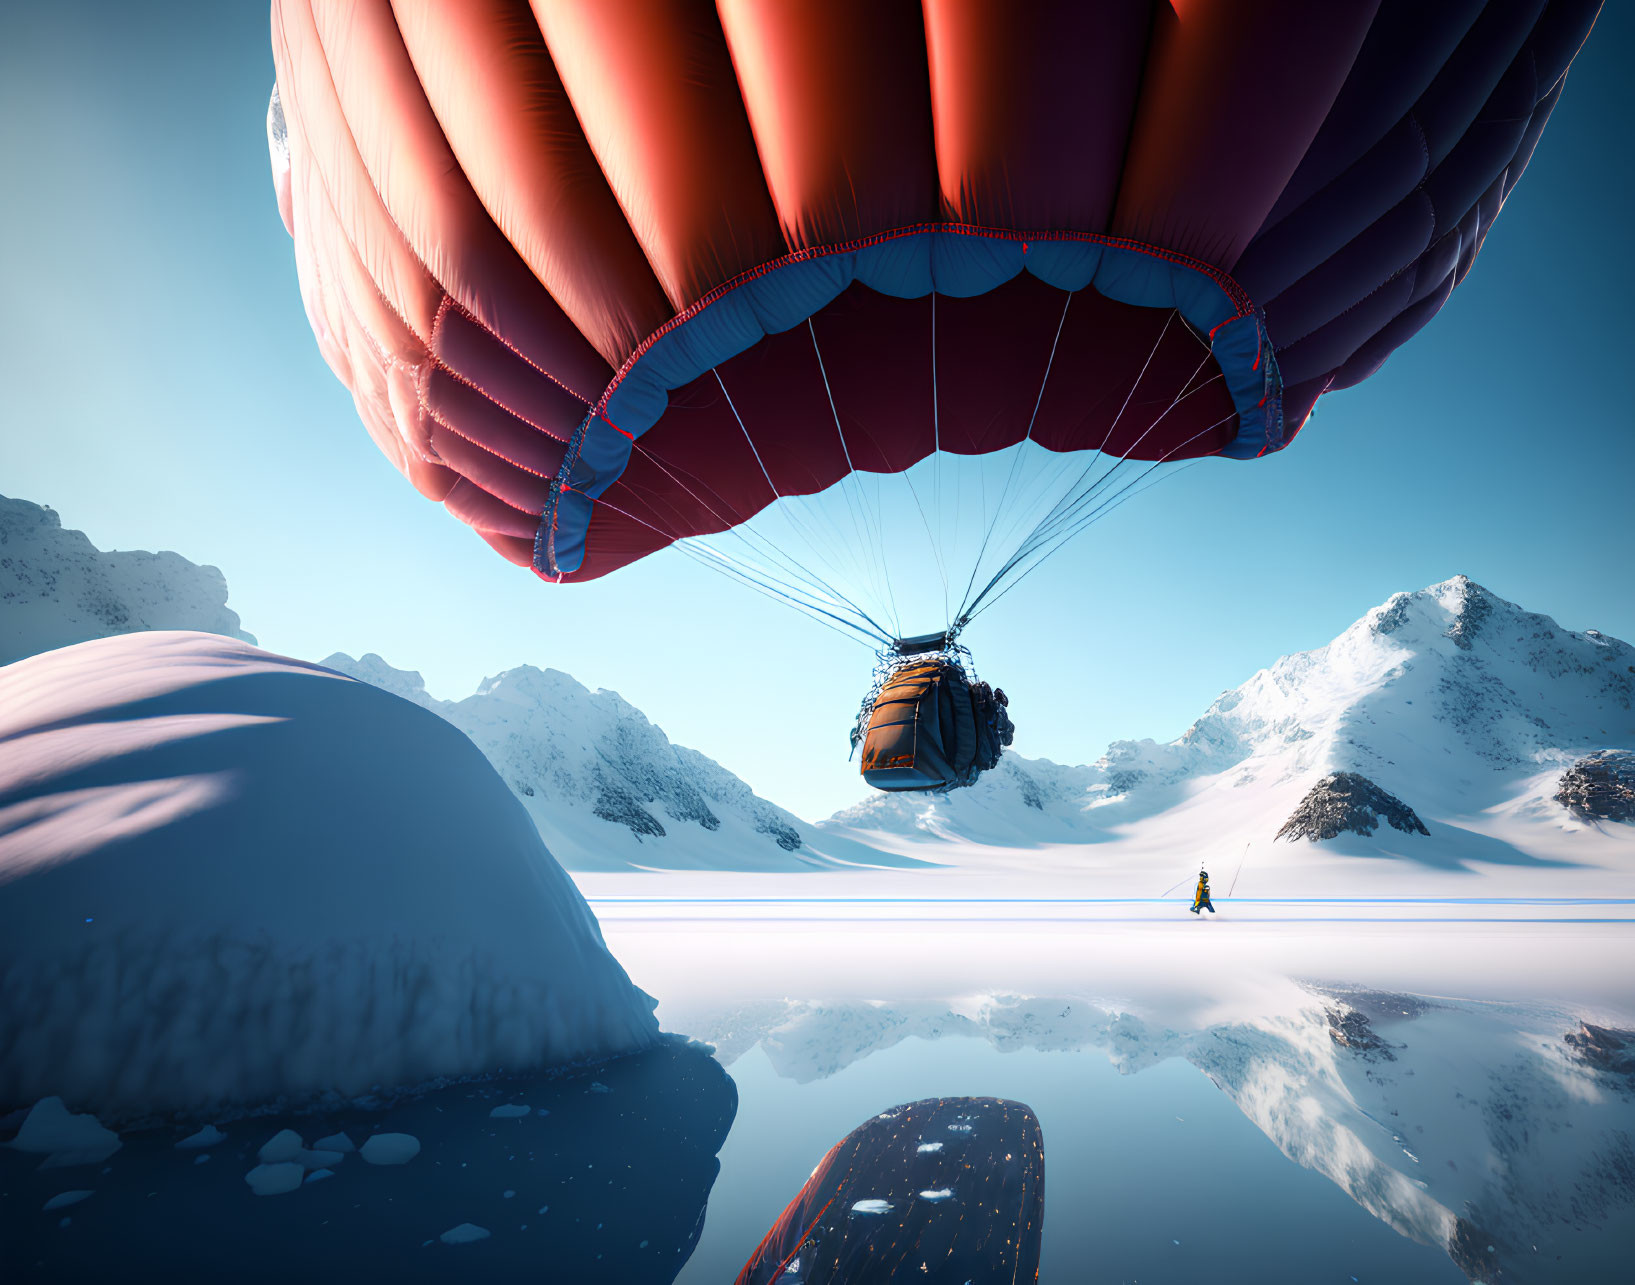 Scenic hot air balloon over snowy mountains with lone figure by water.